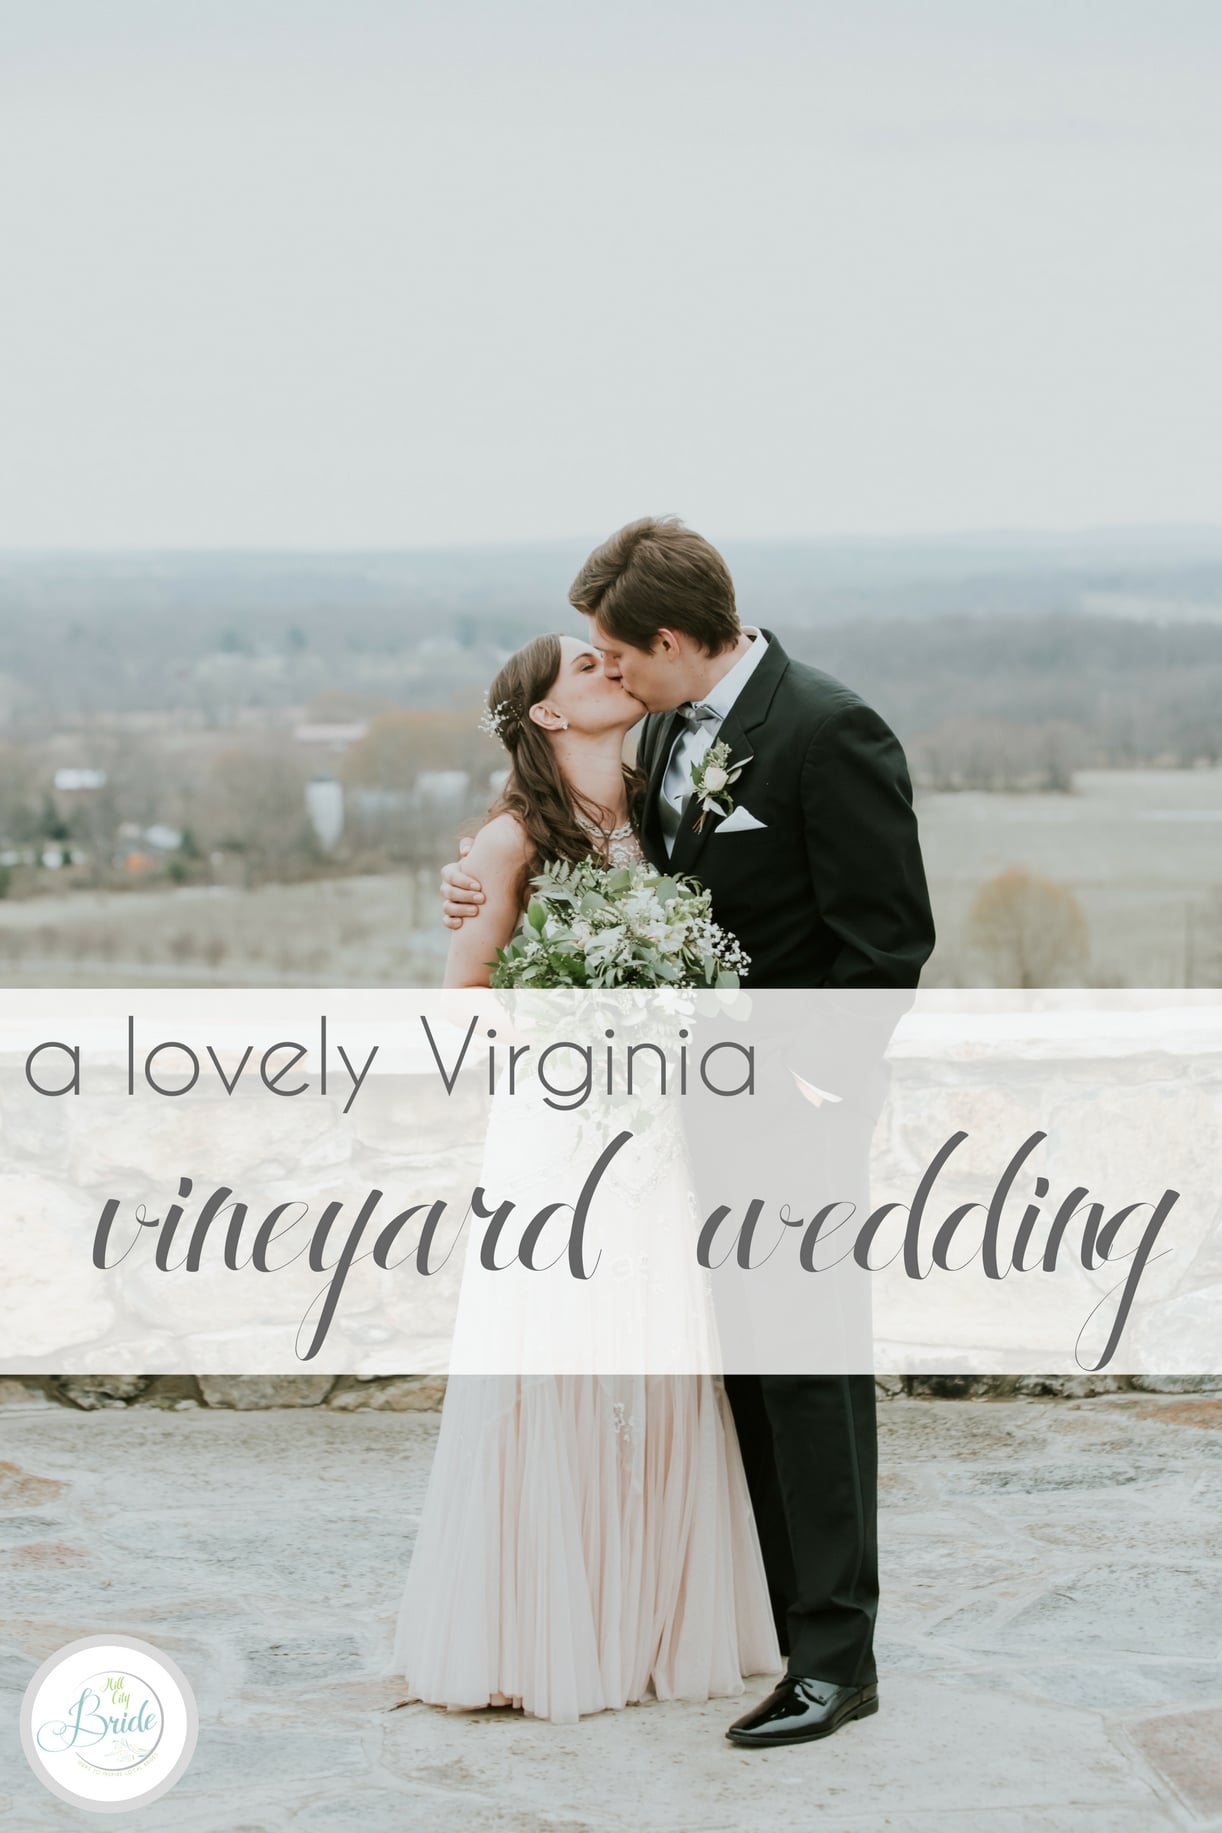 Lovely Virginia Vineyard Wedding as seen on Hill City Bride Blog by Vness Photography